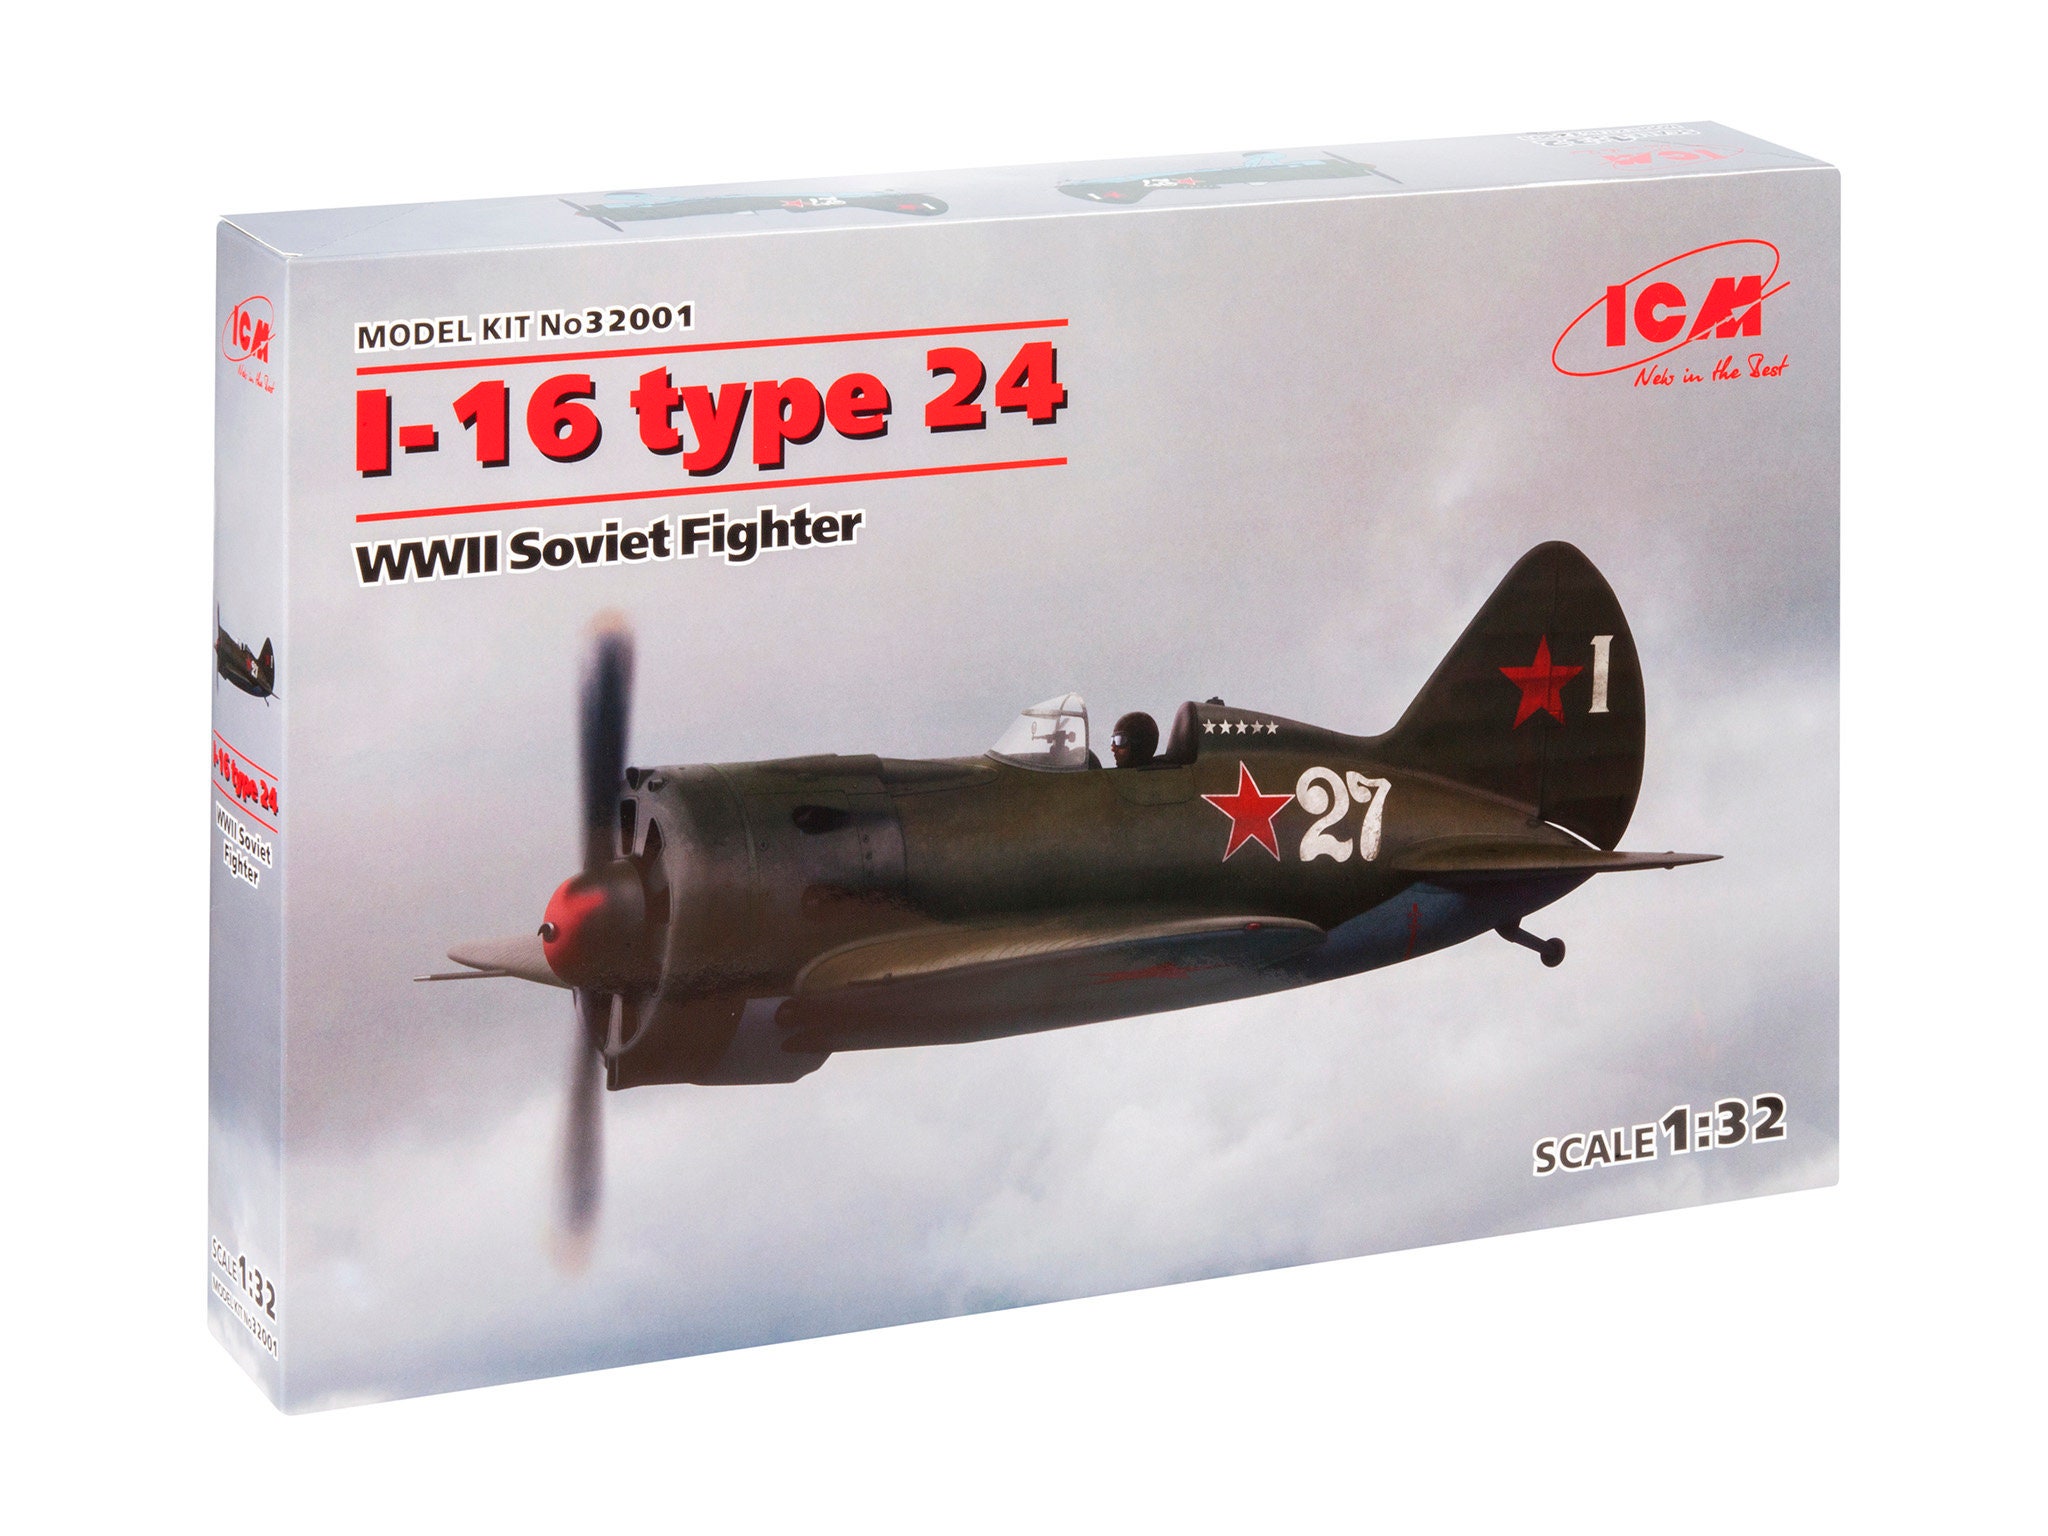 ICM 32002 I-16 Type 28 WWII Soviet Fighter 1/32 Scale Model Kit 191 Mm for sale online 